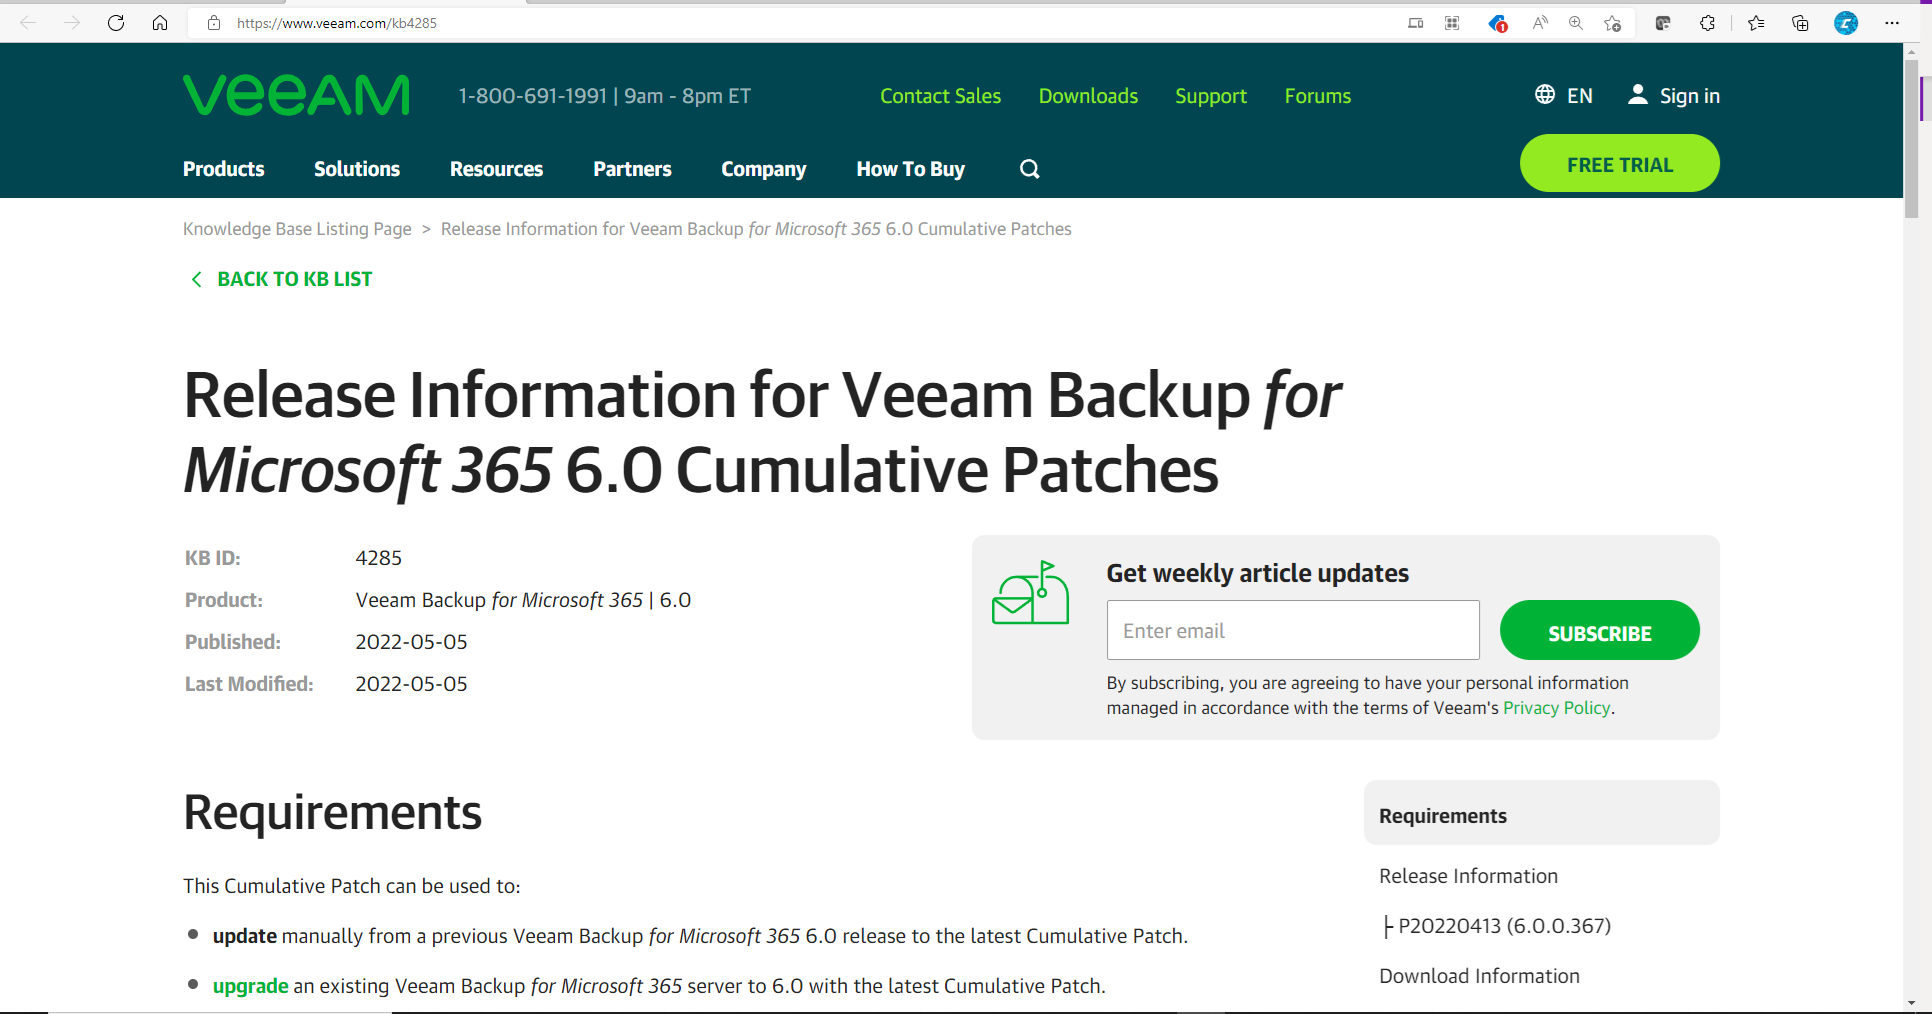 050522 1825 Howtoinstal1 - How to install Veeam Backup for Microsoft 365 v6.0 Cumulative Patches P20220413